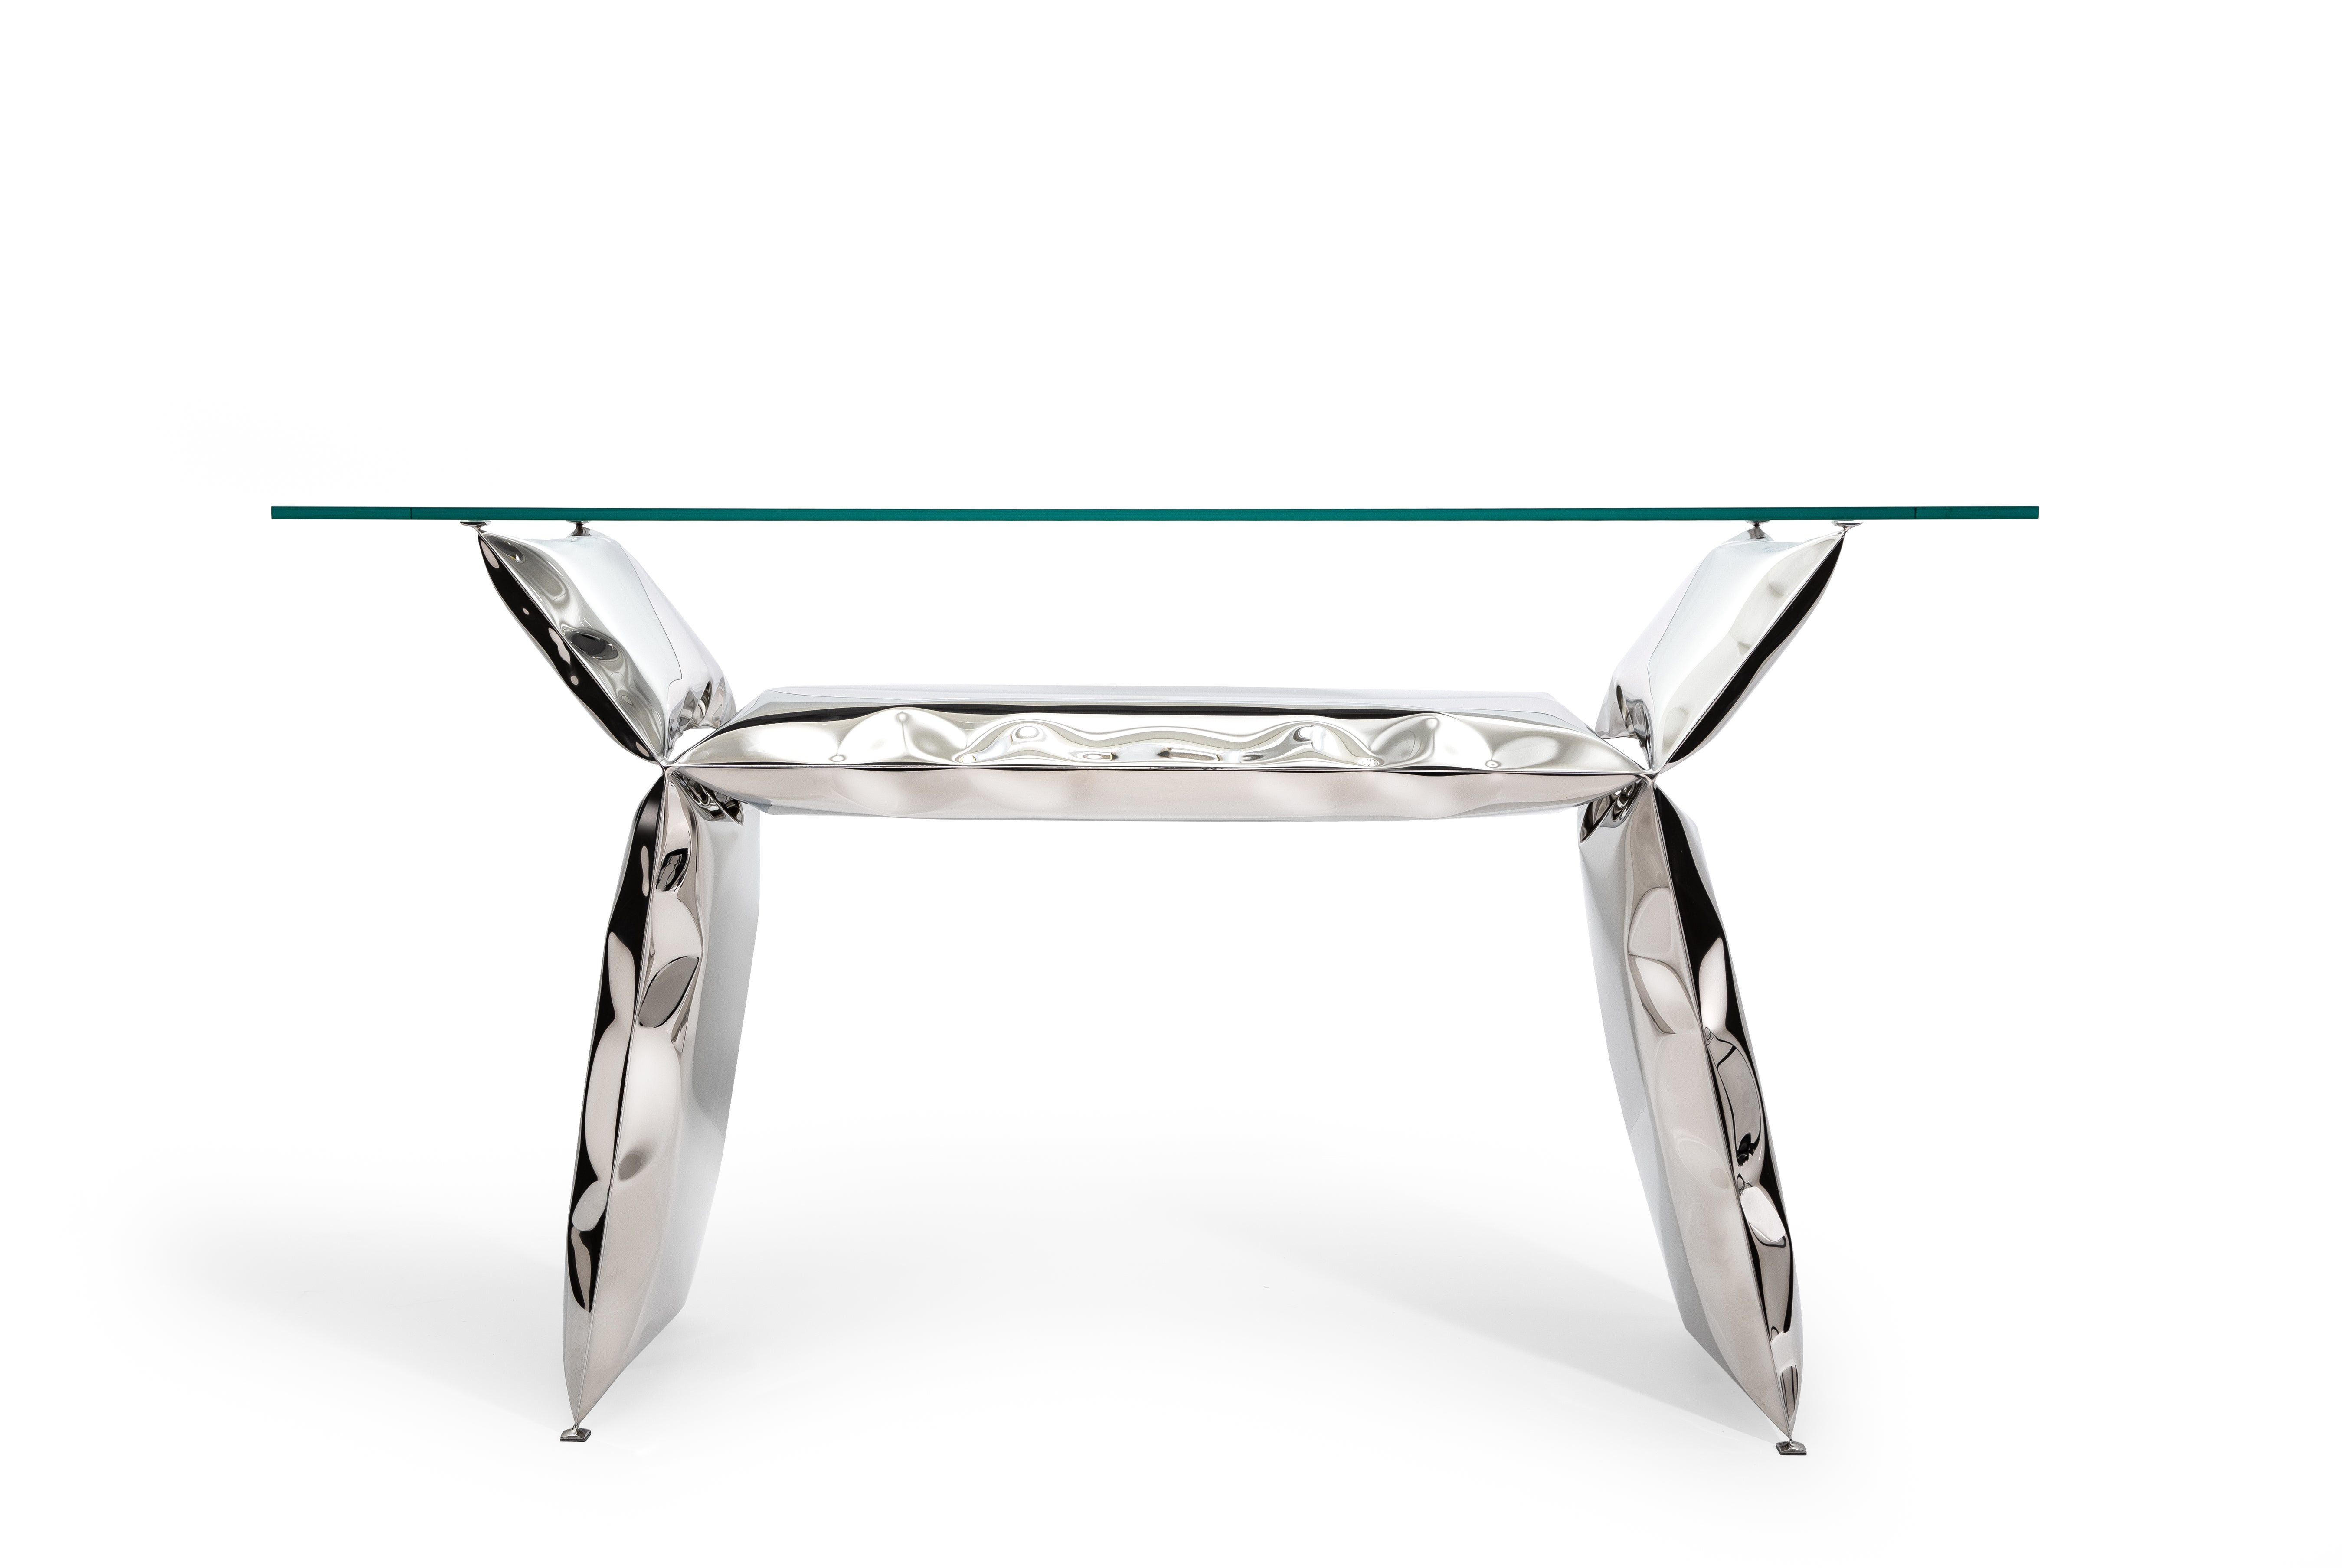 Inflated metal console table. Highly mirror polished stainless steel and 12mm toughened glass with polished edges.  Each table is formed using our metal inflation process, resulting in a unique and individual form, with each table differing from the